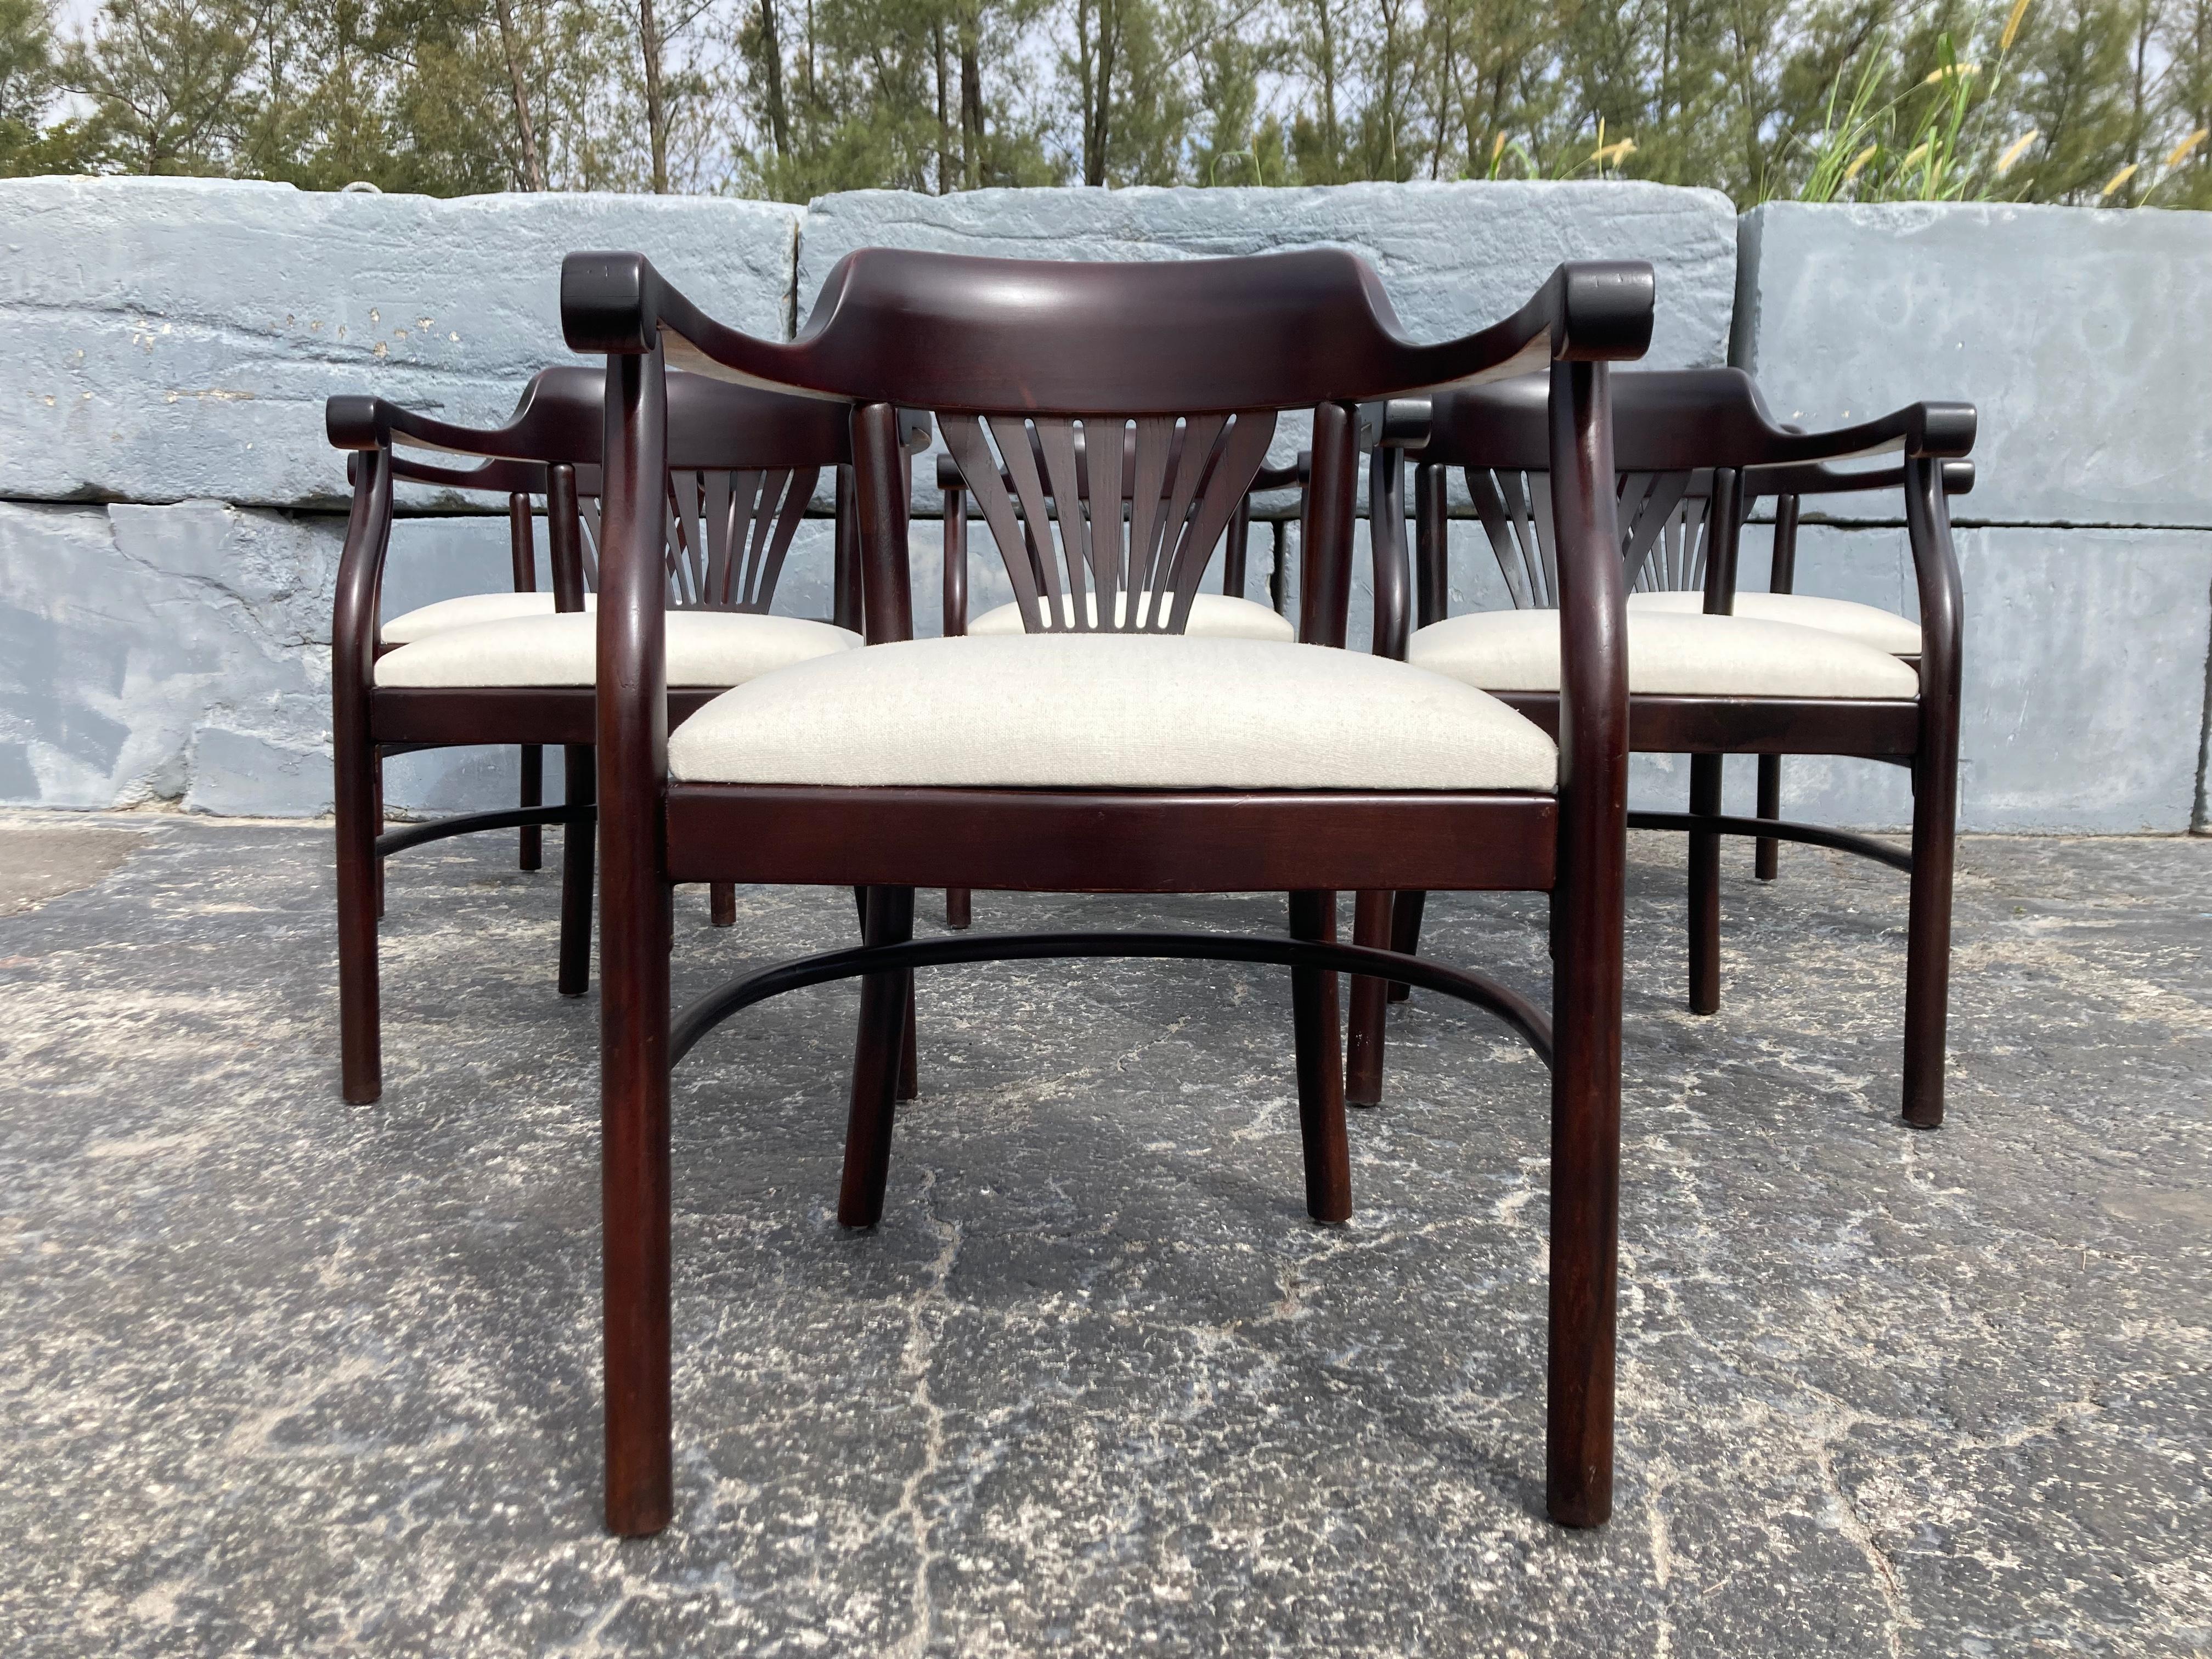 Set of Six Bentwood Arm Dining Chairs In the style of Thonet. Seats have been recently reupholstered, wood has a dark mahogany finish. Selling as a set of six, in total 12 chairs available.
Front Arm height is 27.25”